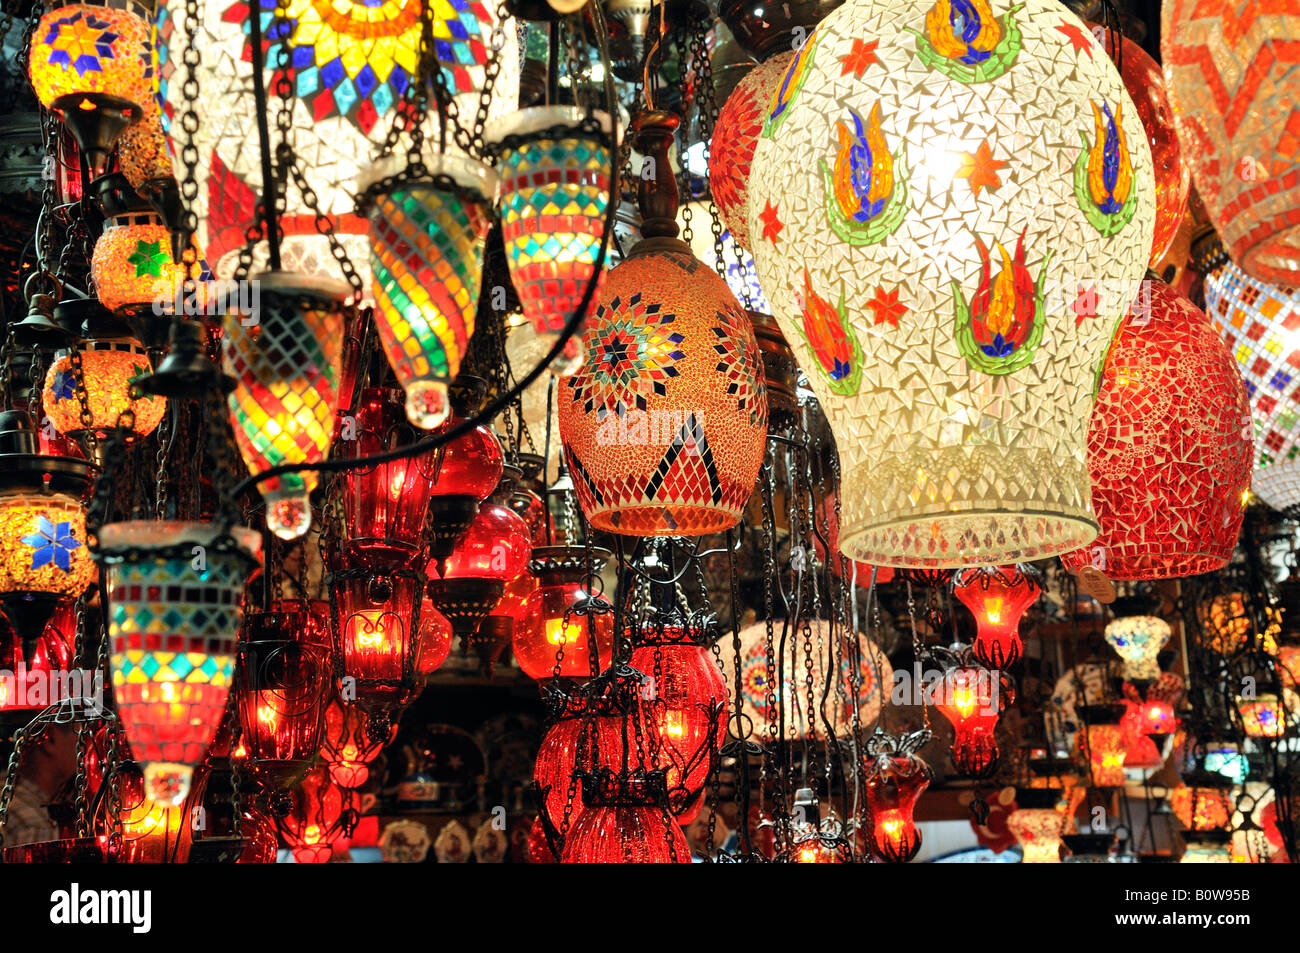 Bright colourful glass lamps sold at the Grand Bazaar in Istanbul, Turkey Stock Photo